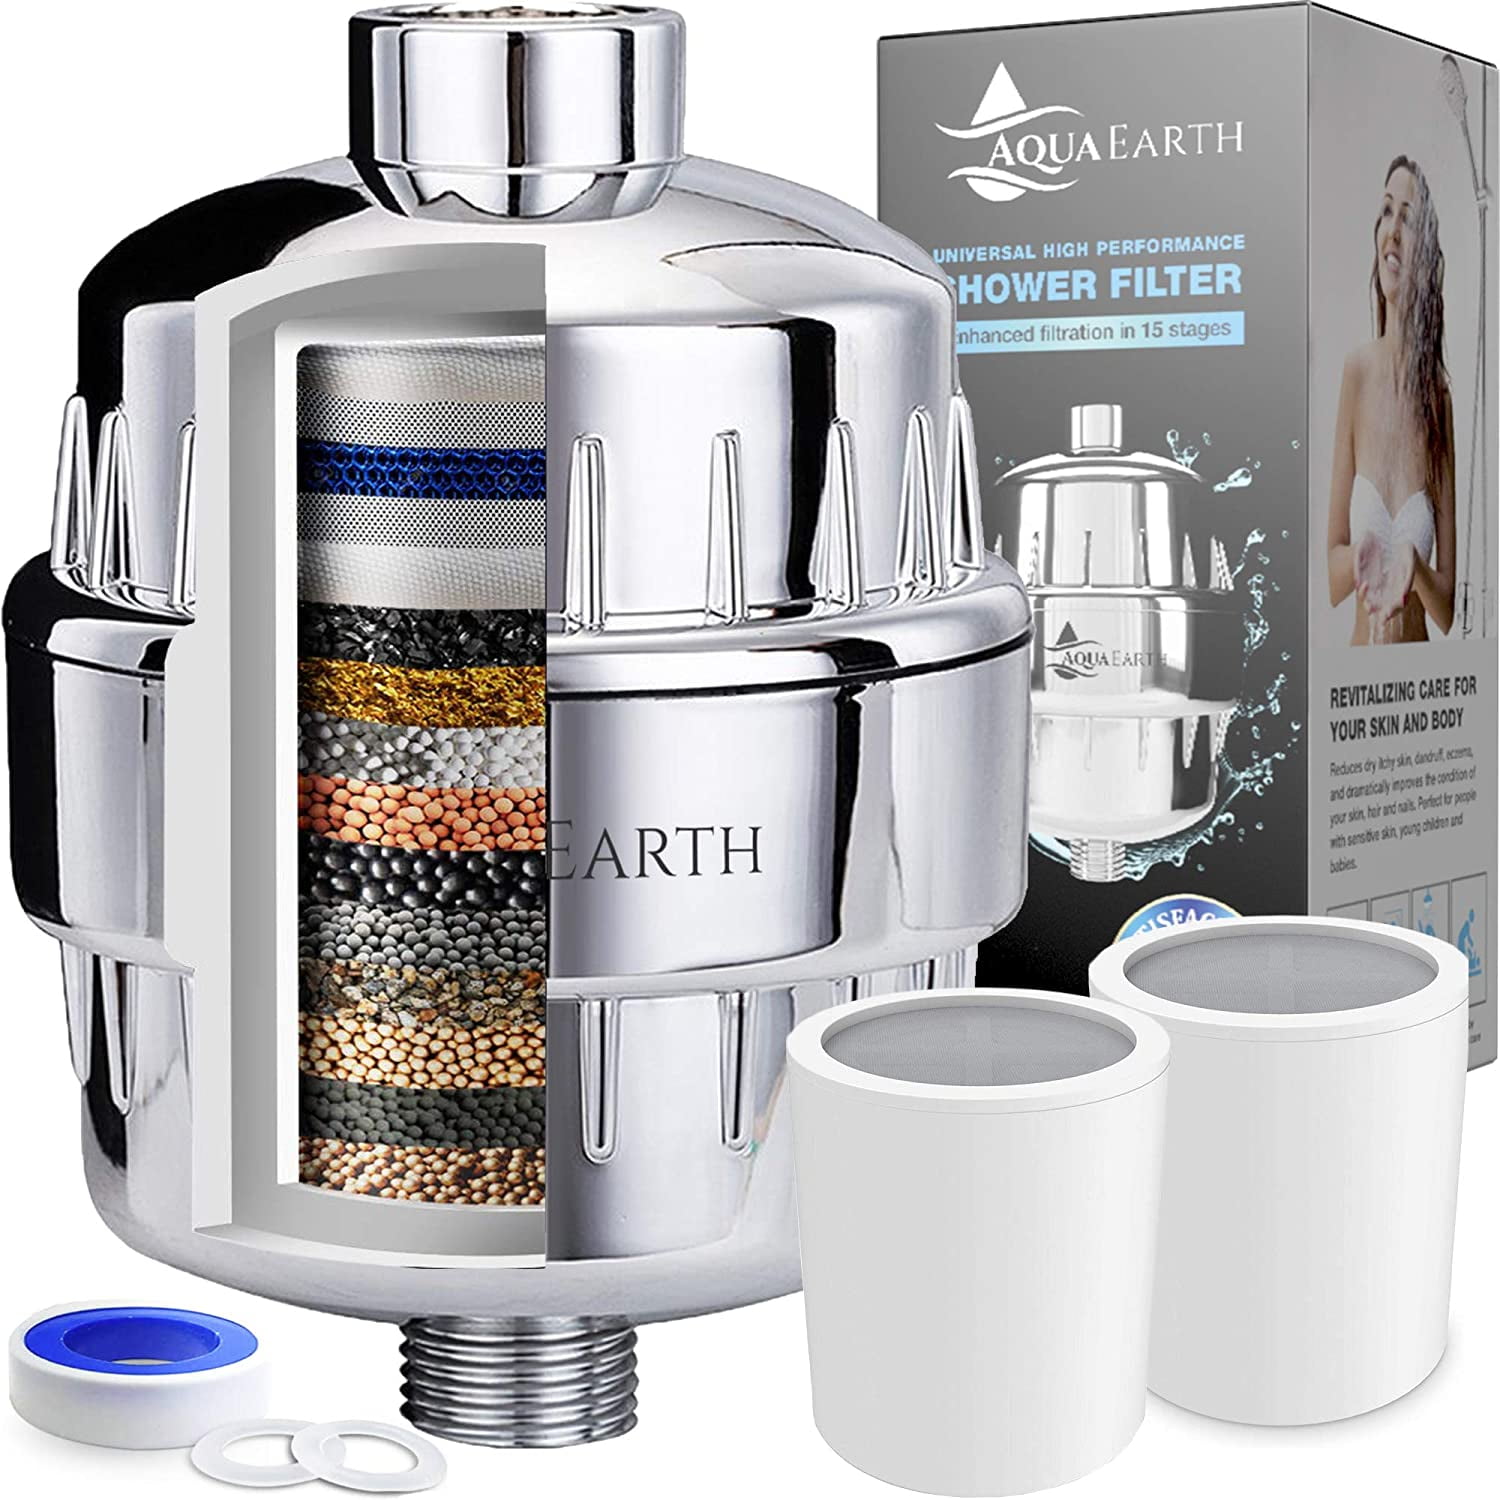 Water Purifier Activated Carbon Household Kitchen Output Universal Shower Filter 